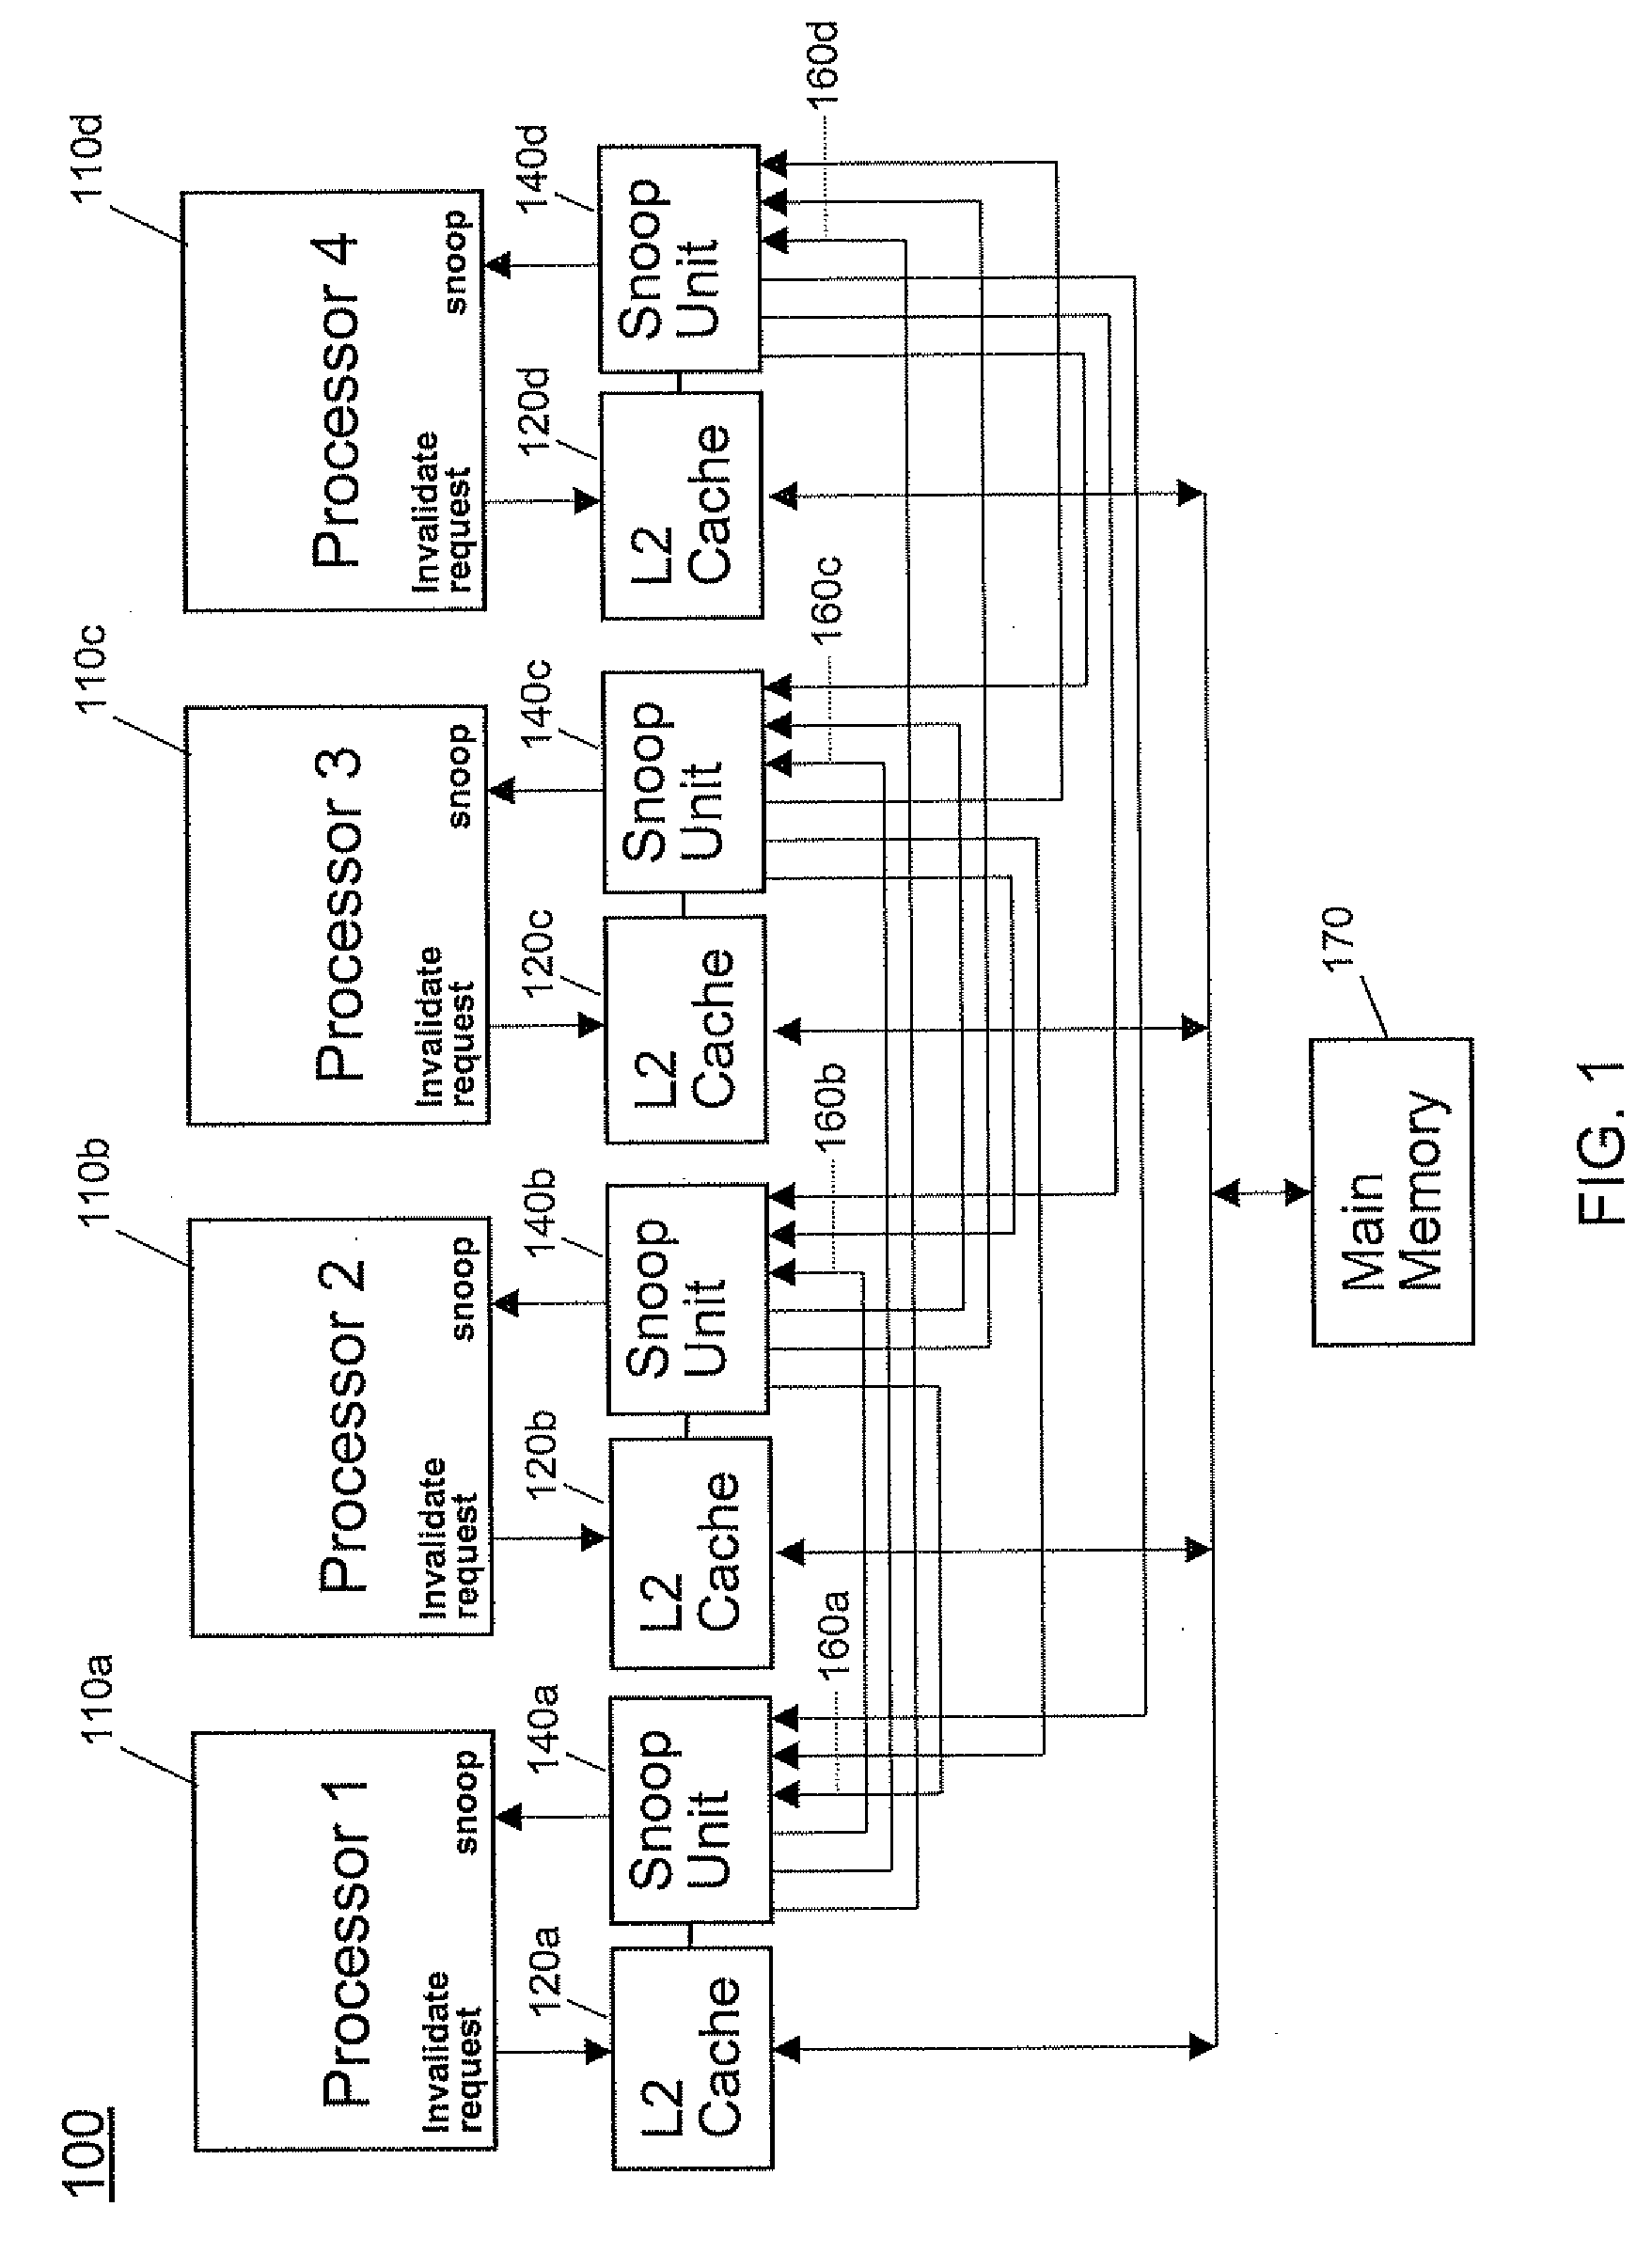 Method and apparatus for single-stepping coherence events in a multiprocessor system under software control